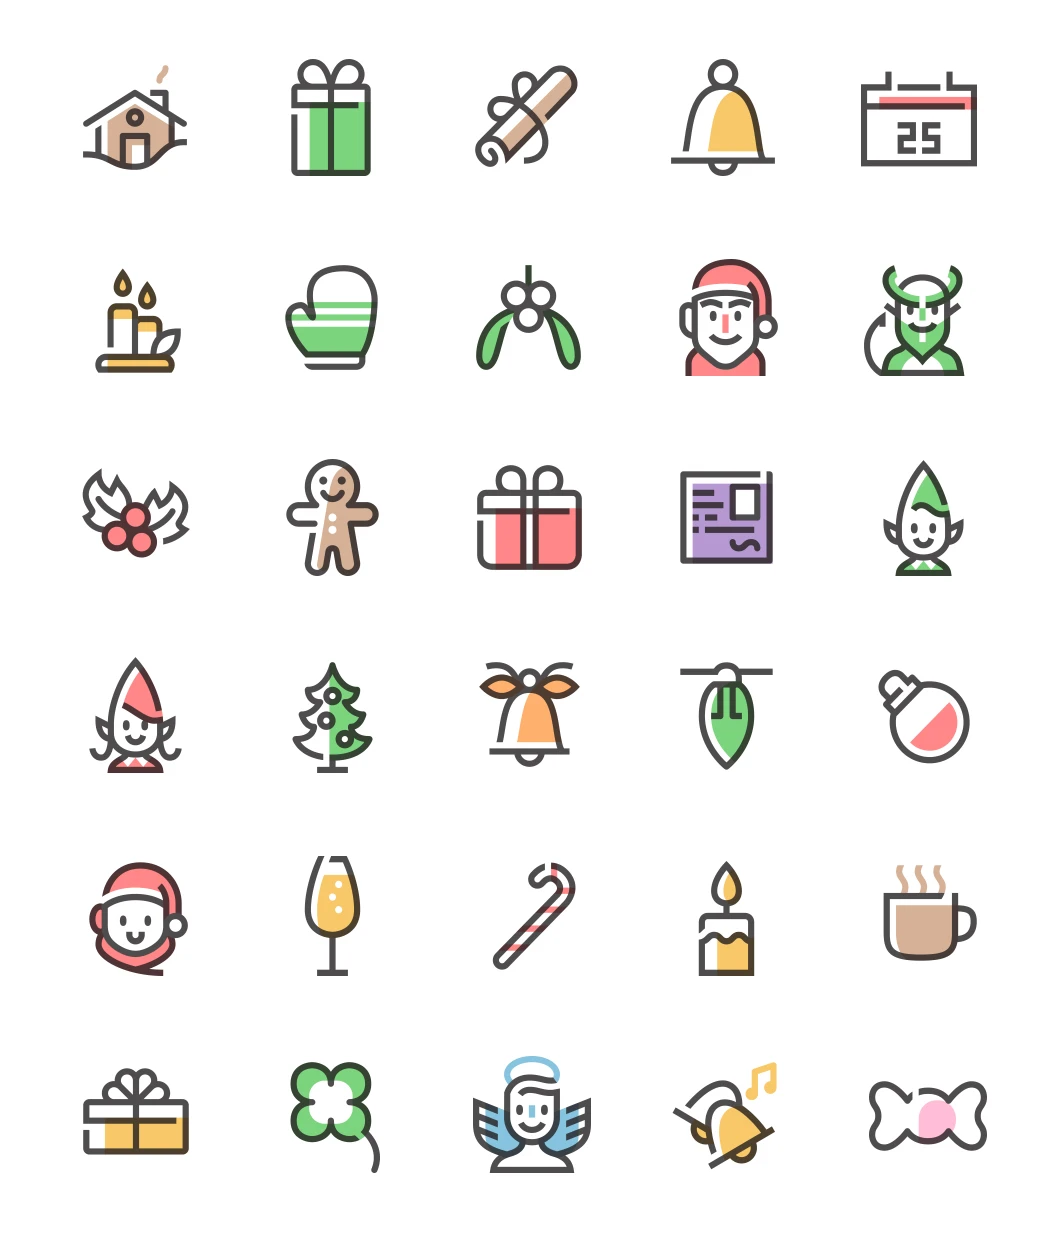 Free Christmas Icons Vector Pack For Figma - In the spirit of the upcoming season we have this free Christmas vector graphics pack containing up to 30 new icons such as: scarves, ugly sweaters, hats, reindeer antlers and more.